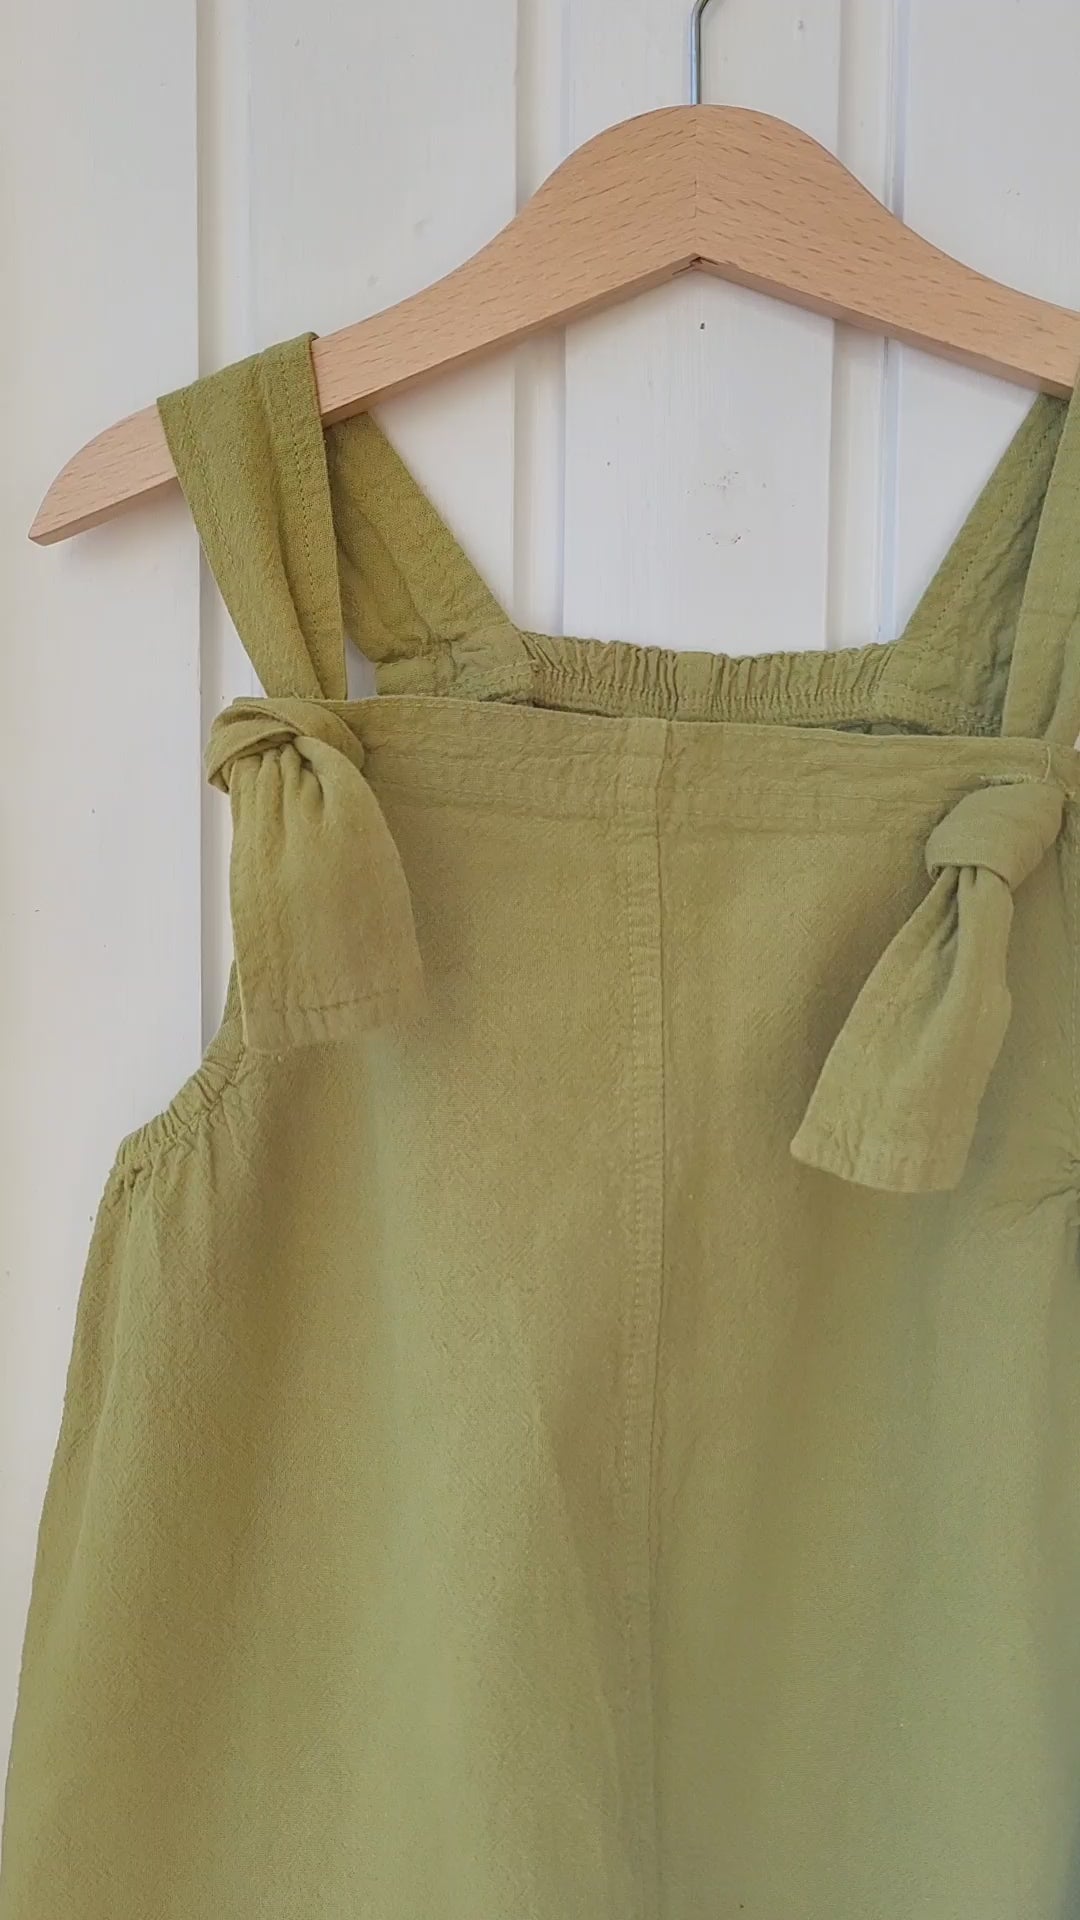 Liten Aventuris Natural Tocuyo Cotton overall for kids. Comfortable, loose-fitting and perfect for the sunny days. The Oske Overall brings 2 big pockets and adjustable straps. Perfect for boys and girls. Barnkläder, Bomullskläder, Natural kläder Hängselbyxor.